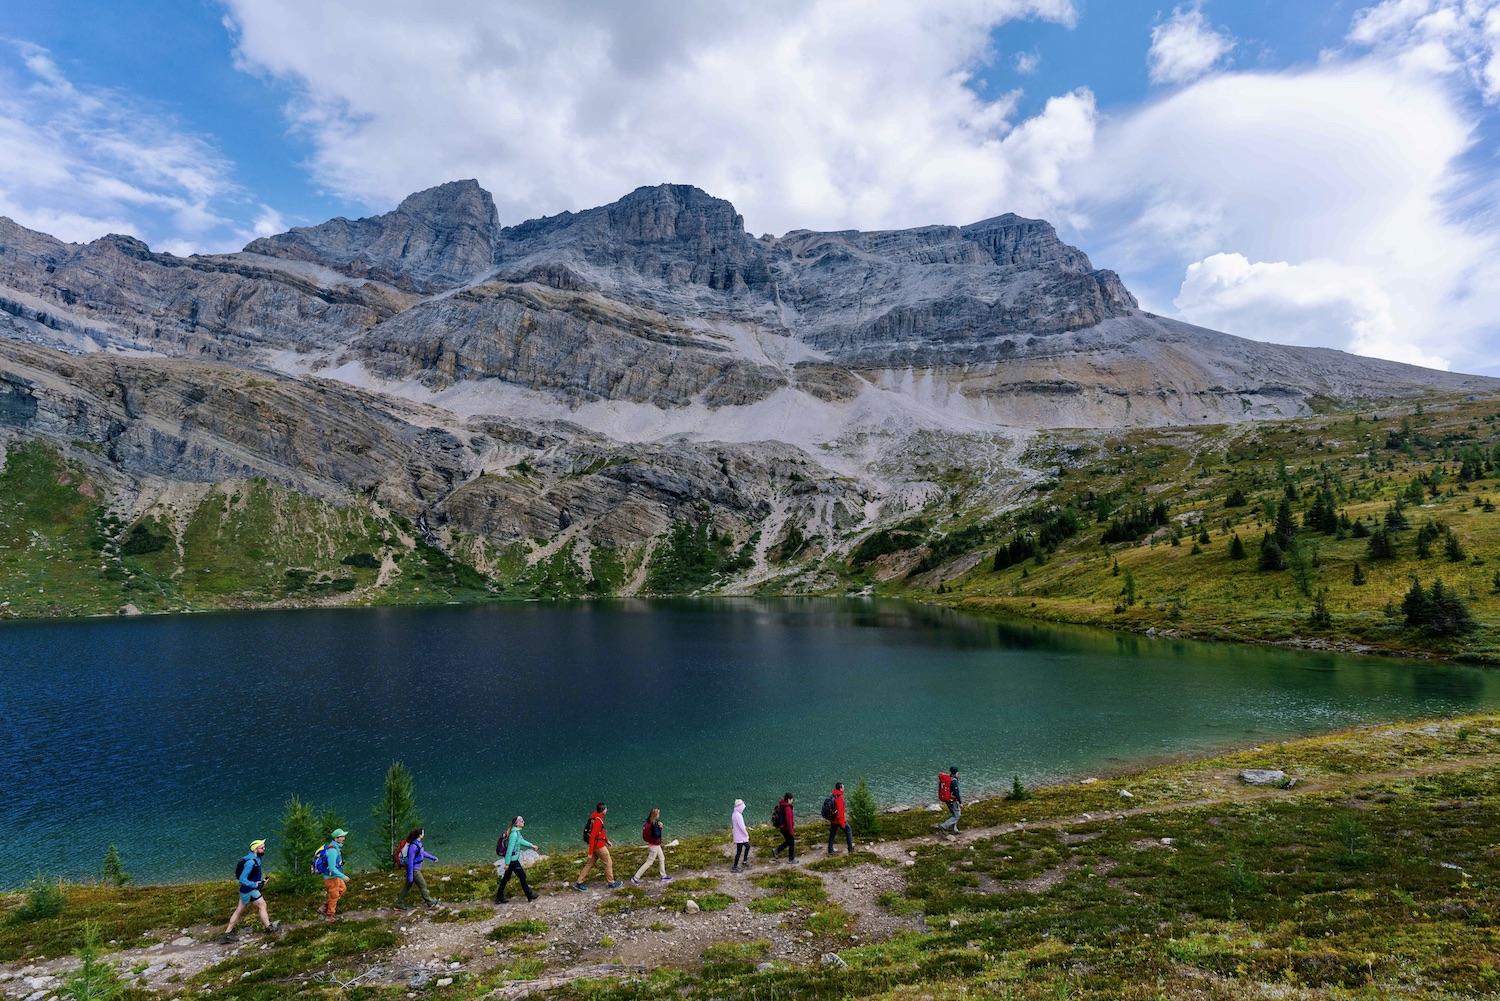 In 2022, Parks Canada offered guided conservation hikes to Hidden Lake.